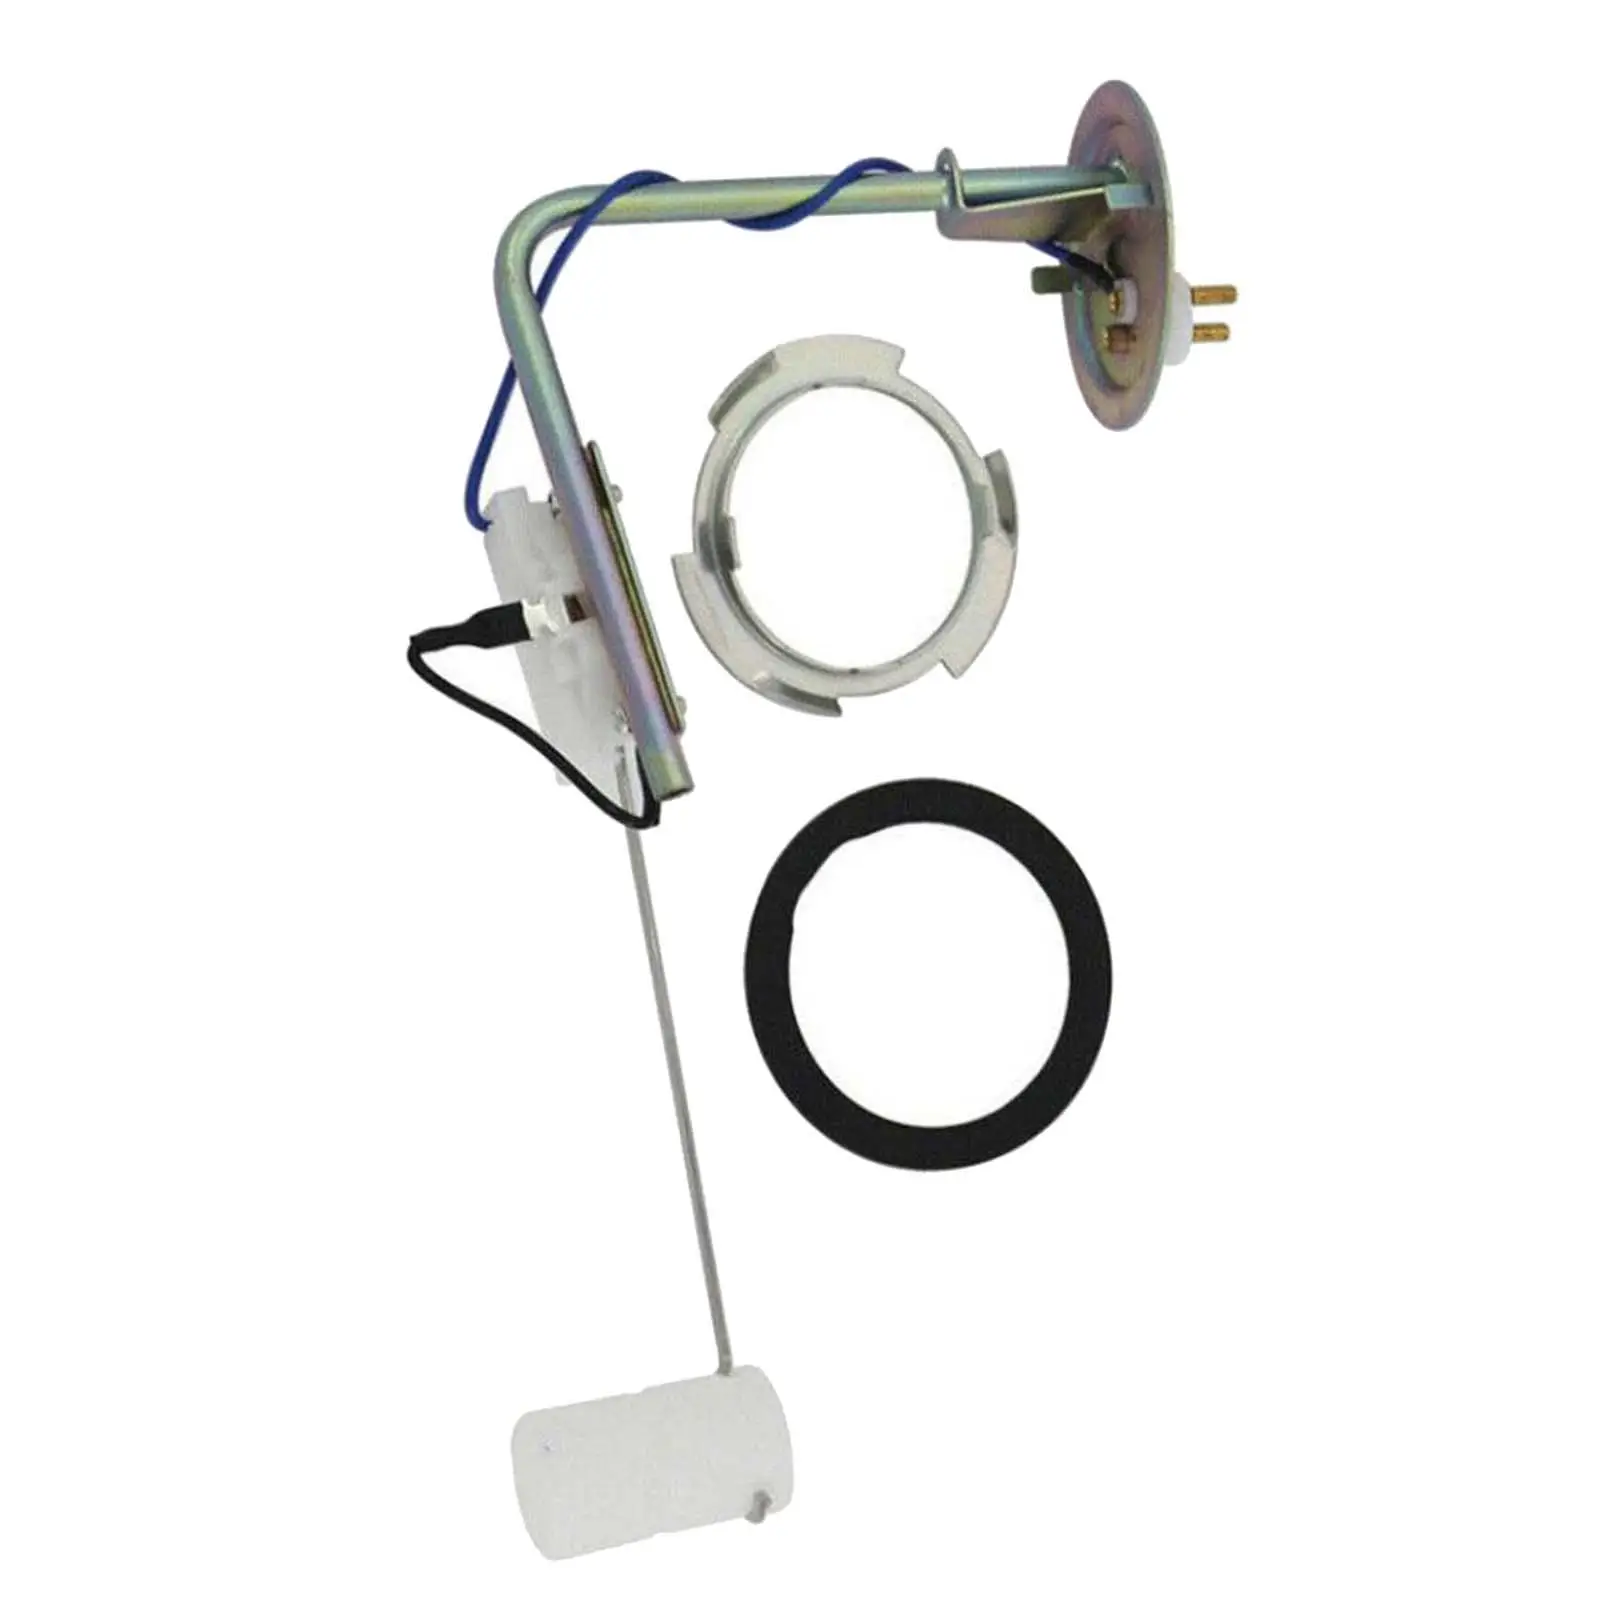 Fuel Pump Sender Replacement Assembly for Lincoln Mercury 1980-1989